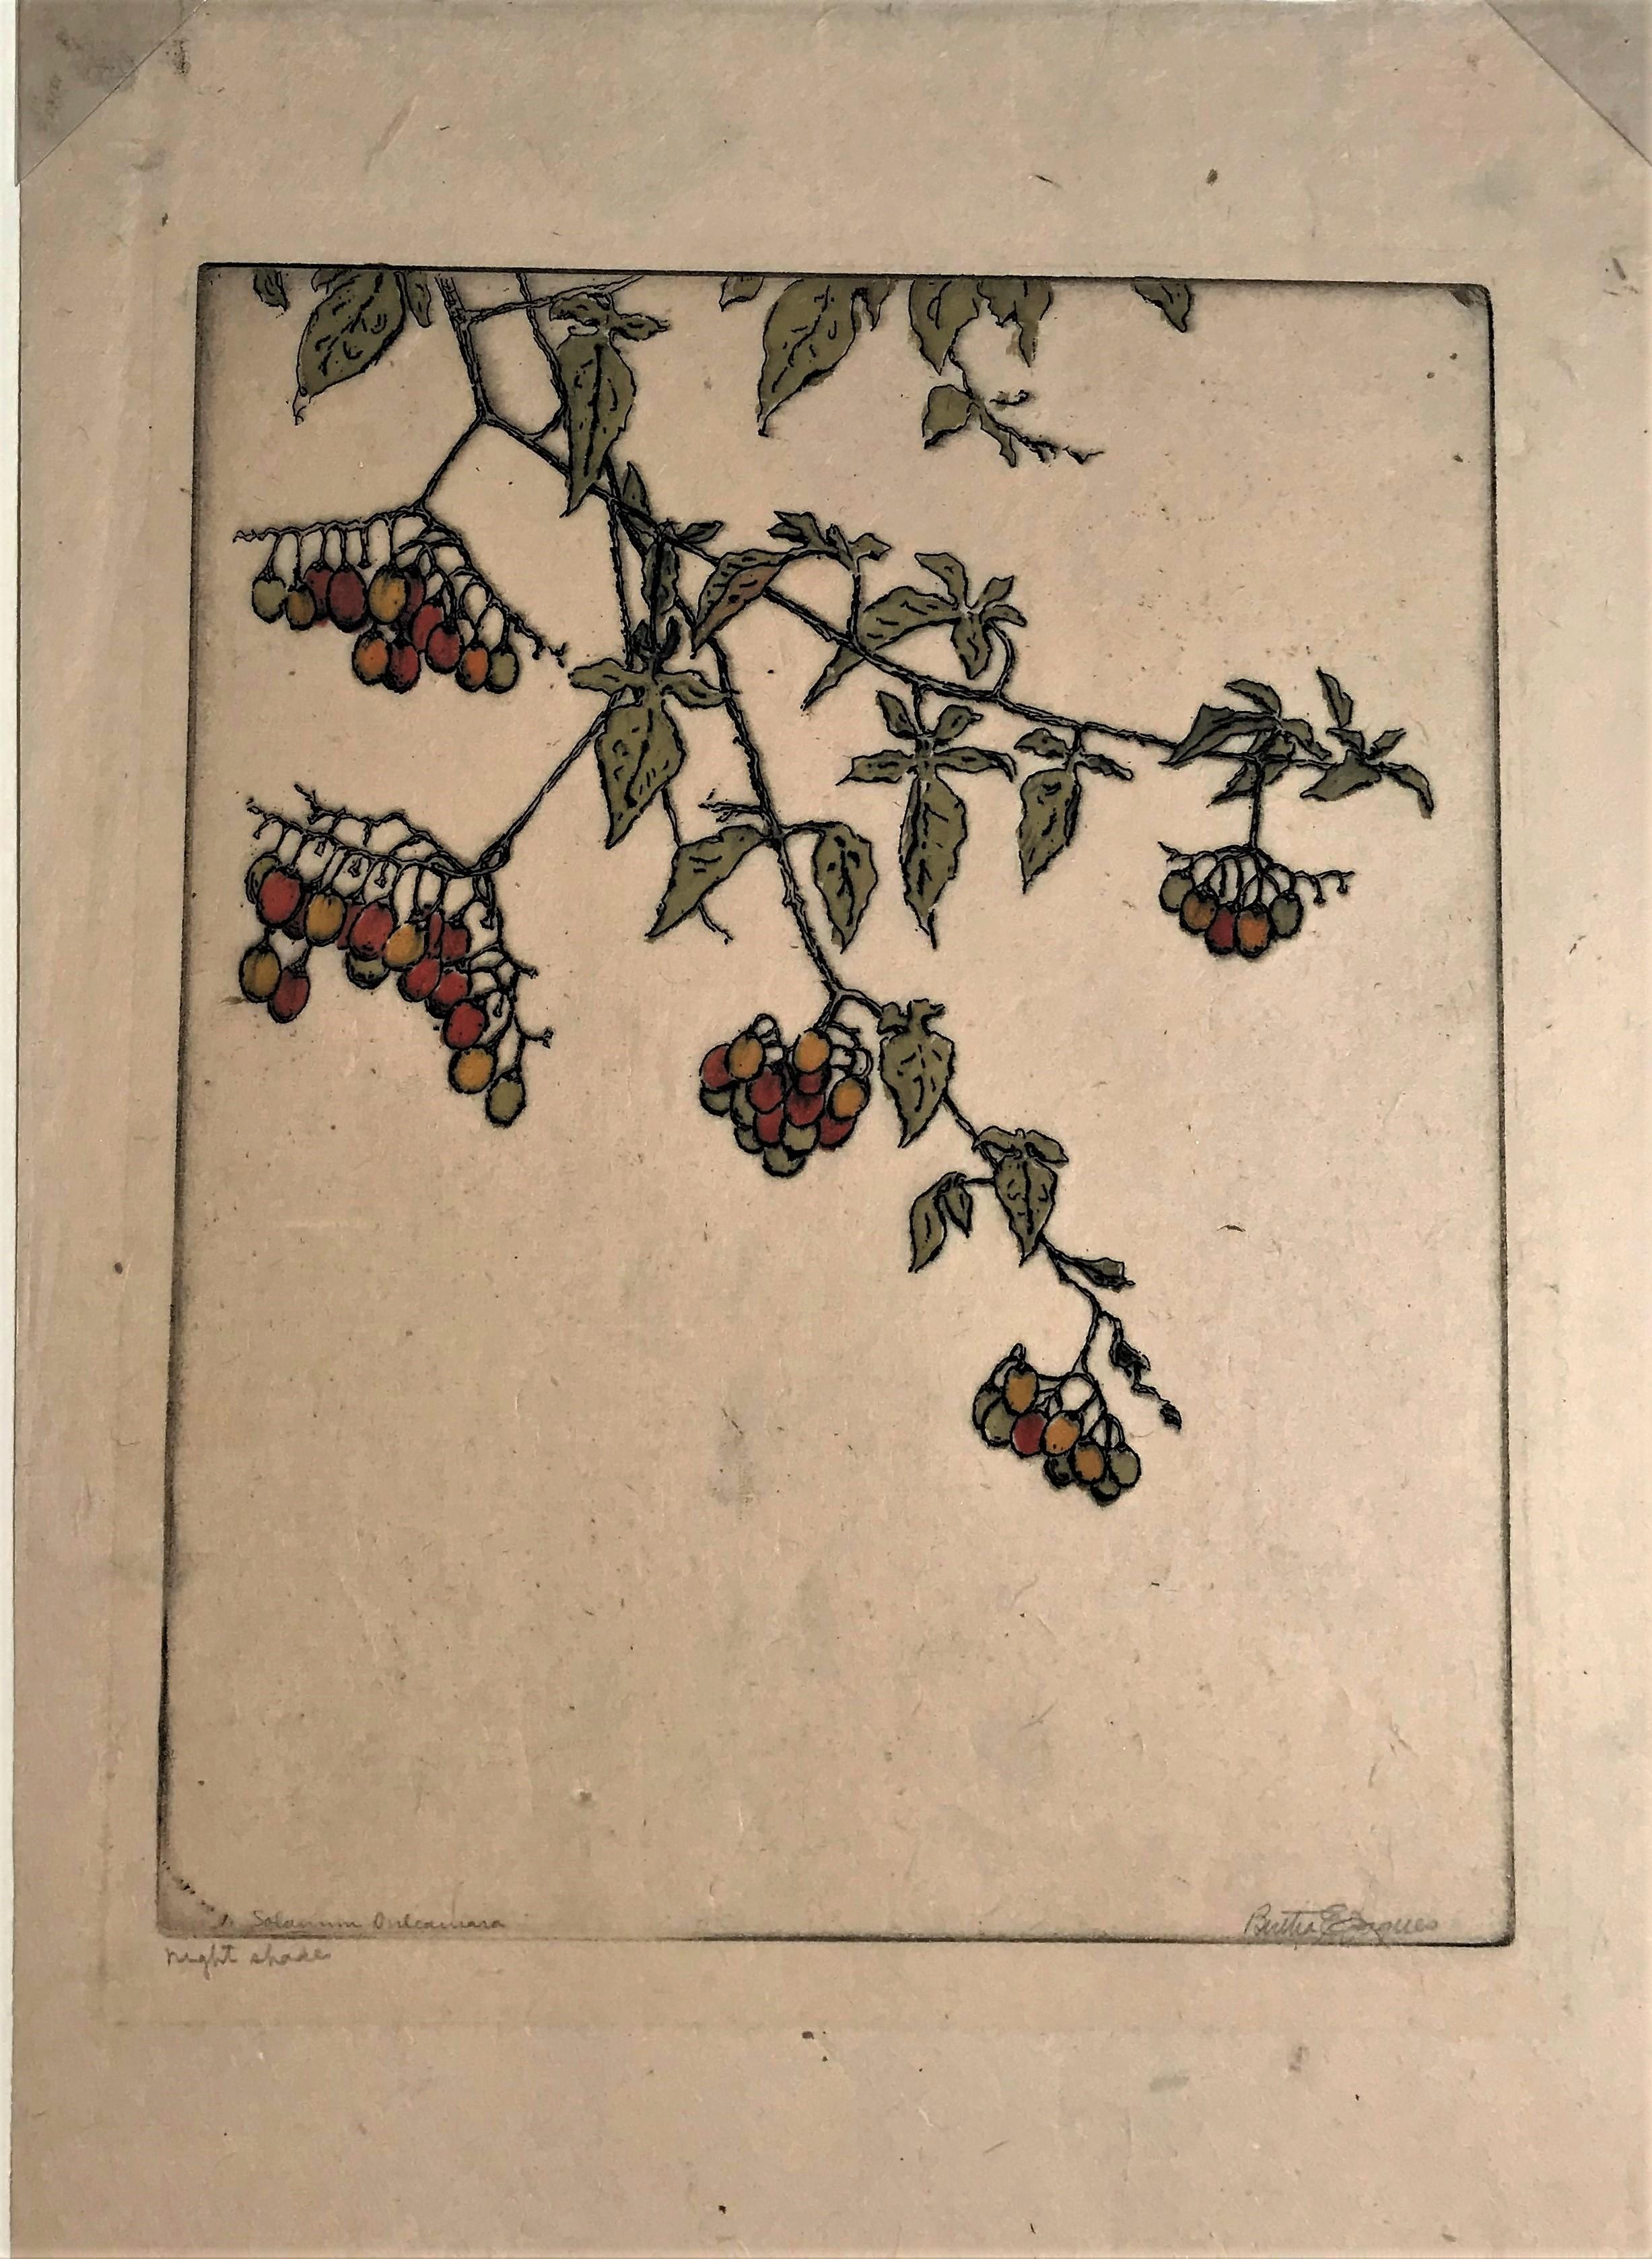 Fulcassiara (Night Shade #2. Solanum Dulcamara). ( Deadly Nightshade). 1932. Drypoint with hand coloring. Jaques 432. 10 7/8 x 7 7/8 (sheet 15 1/8 x 10 1/16). A rich impression with plate tone, printed on Japanese mulberry paper. Provenance: the